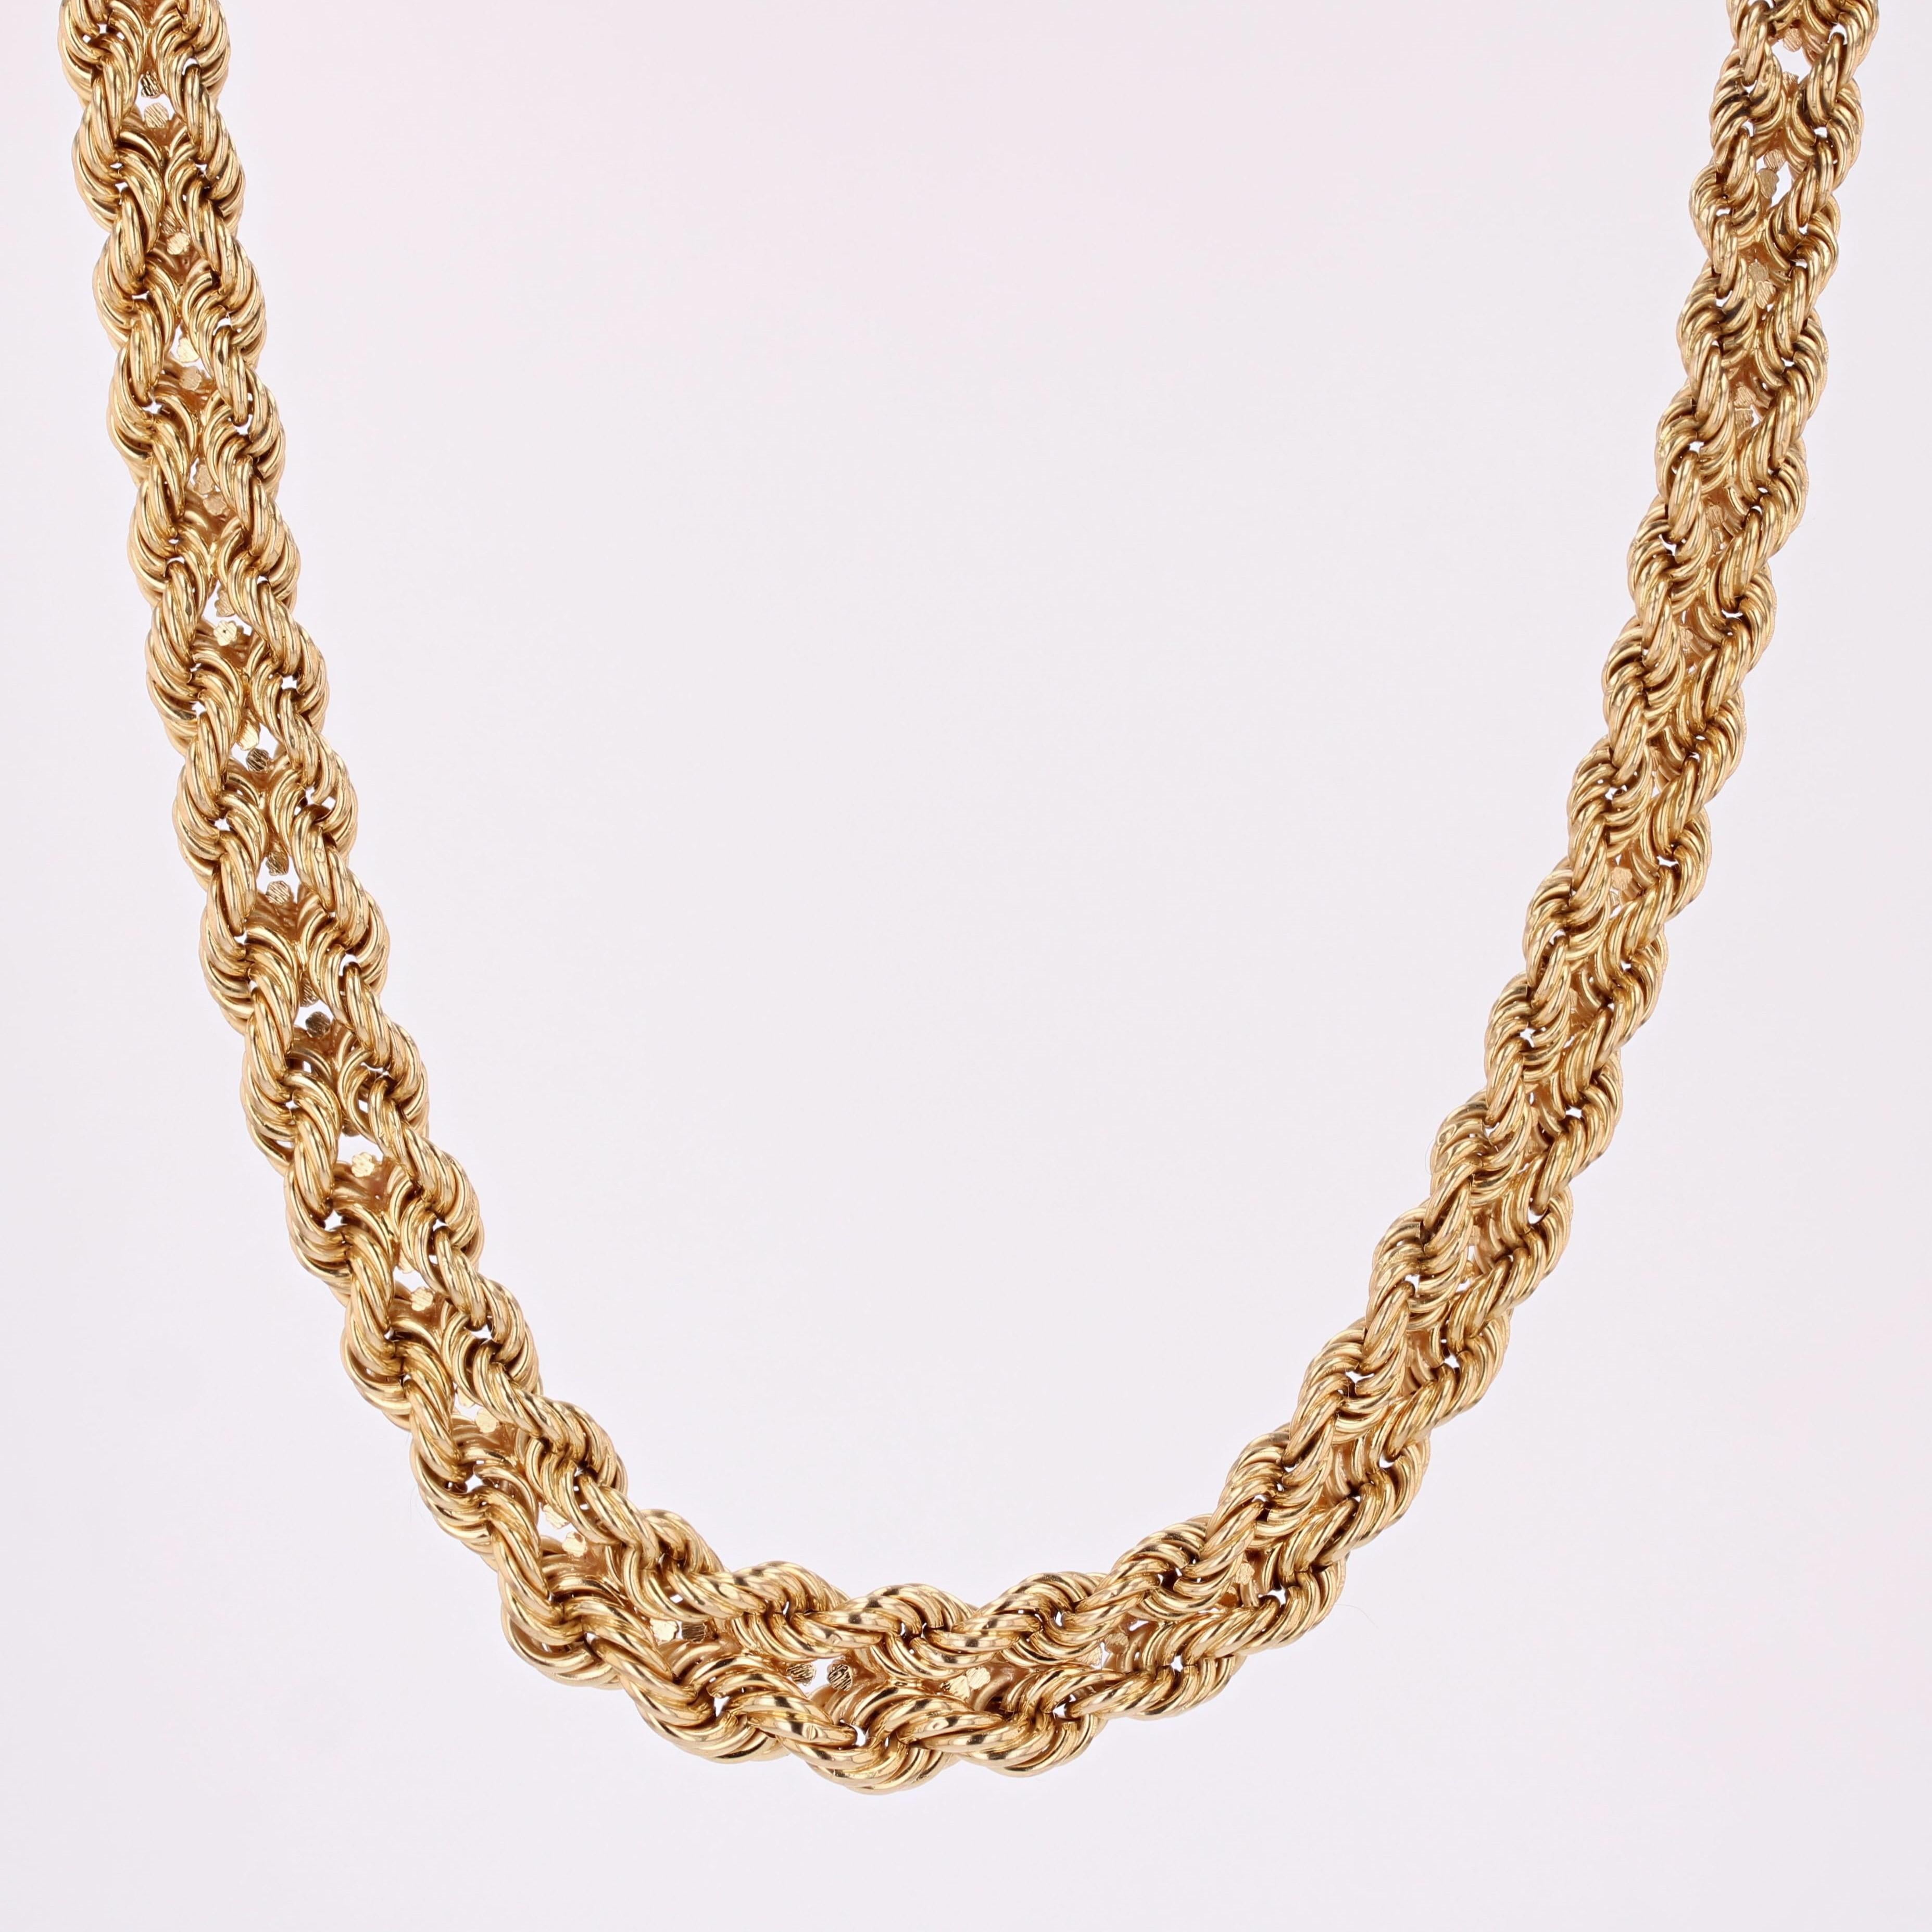 French 1950s 18 Karat Yellow Gold Falling Braided Choker Necklace For Sale 9